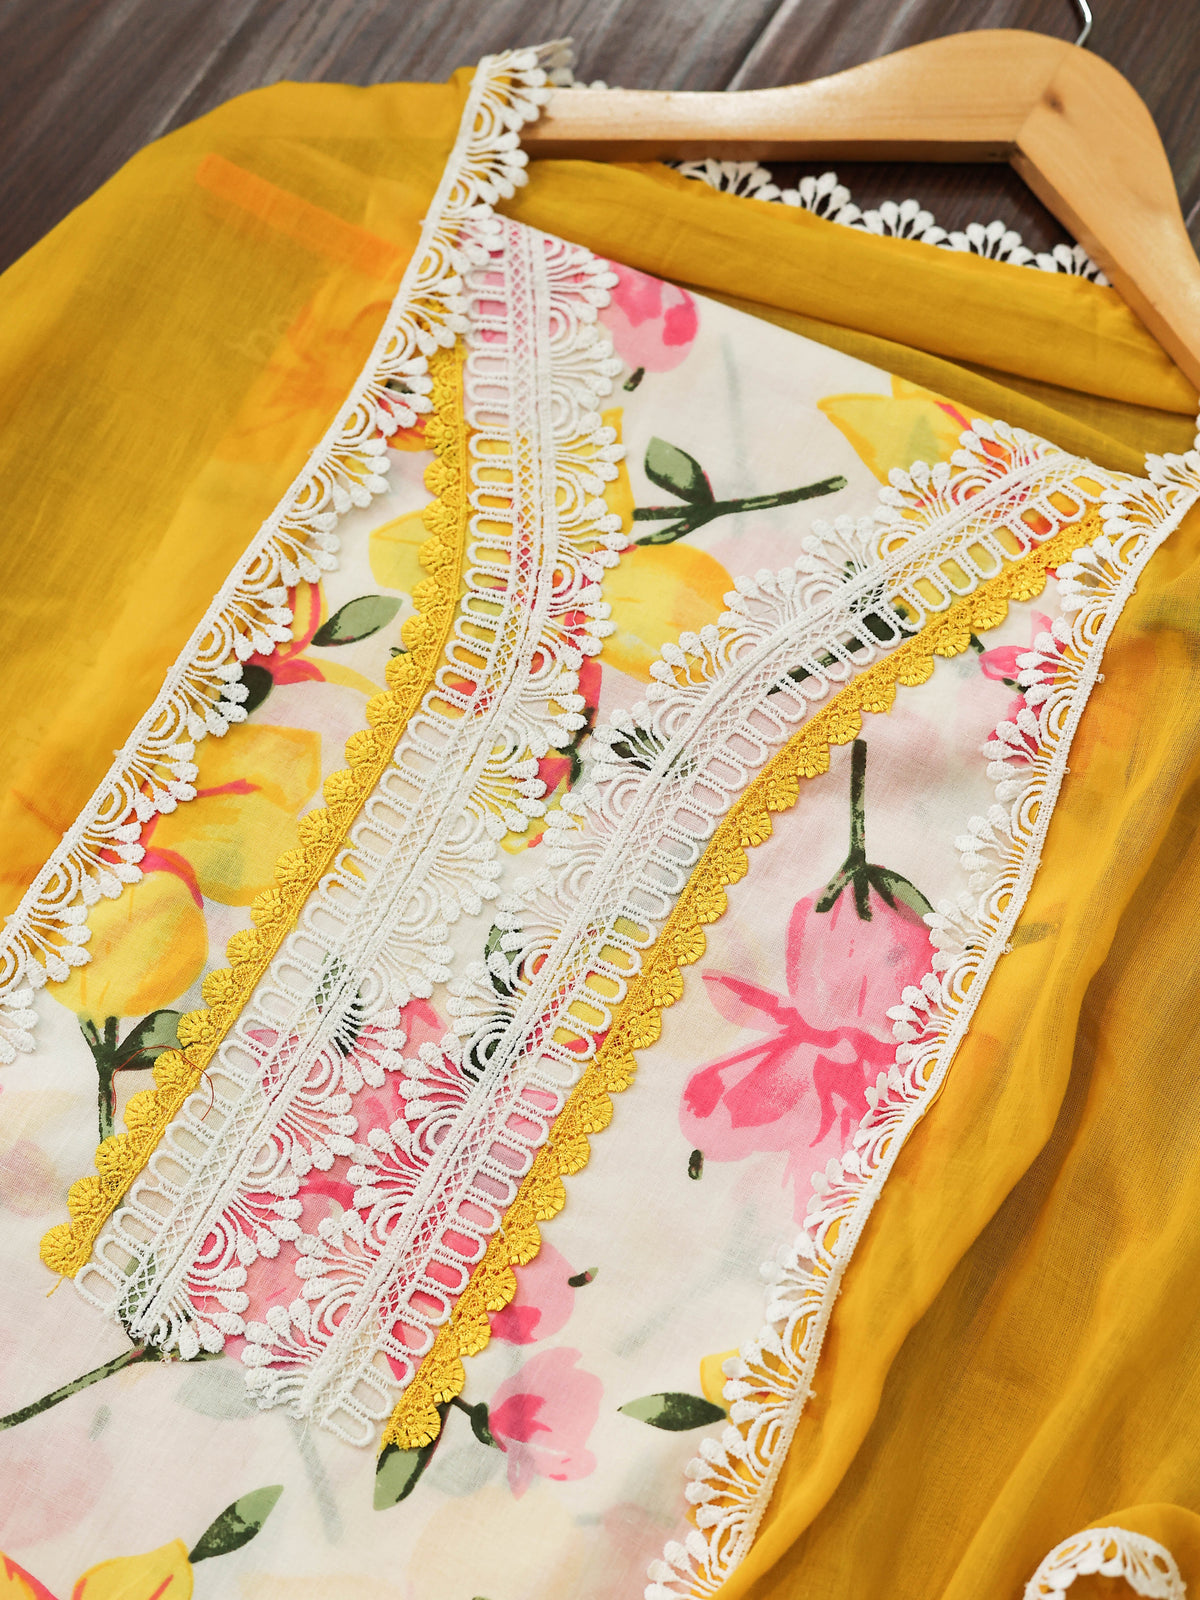 White Floral Printed Suit with White and Yellow Lace Embellishments Cotton Unstitched Dress Material Suit Set